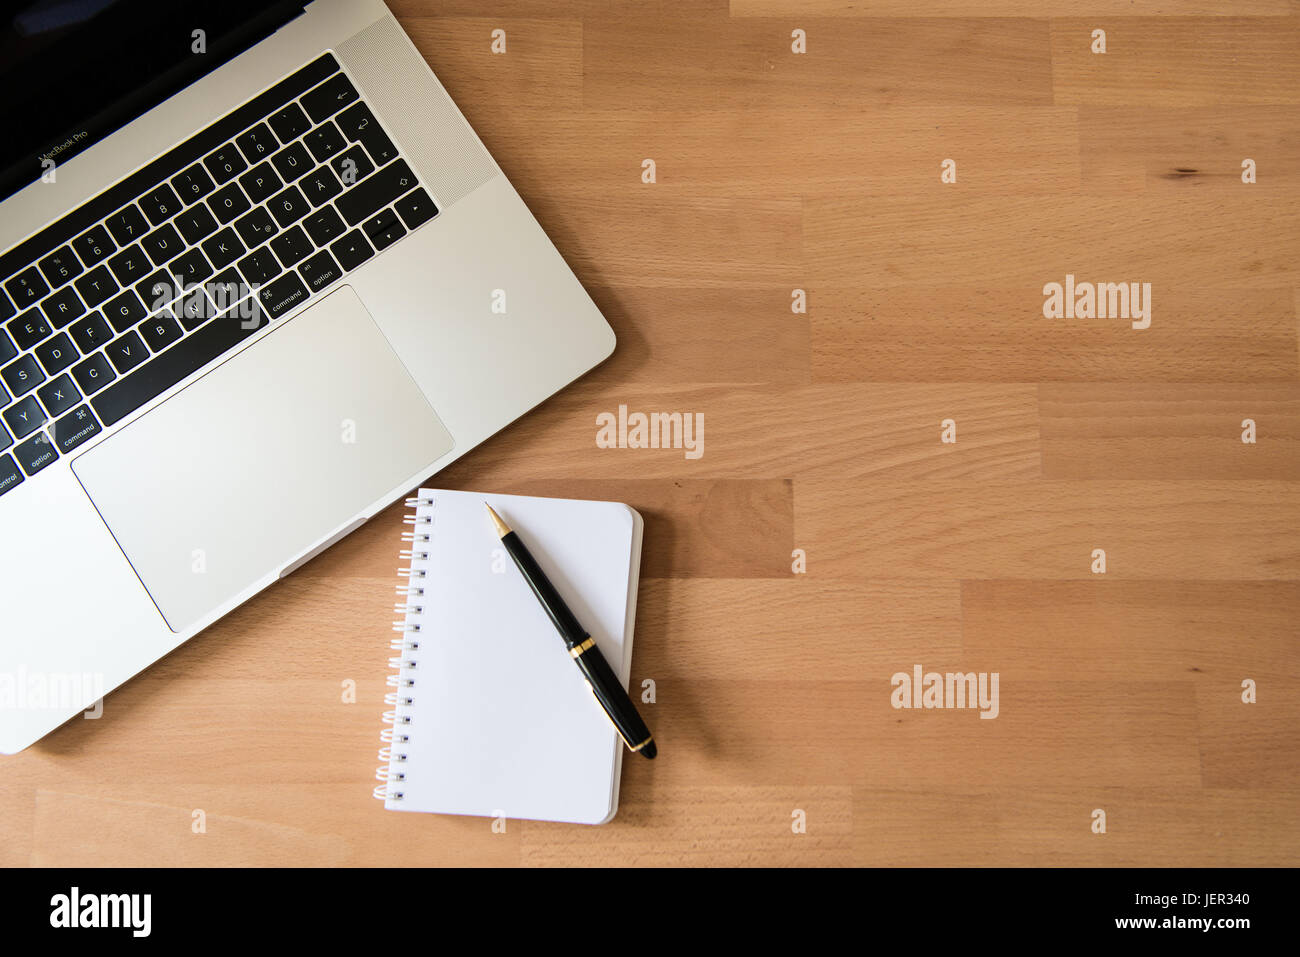 Laptop, Apple MacBook Pro with pen and notepad on desk Stock Photo - Alamy